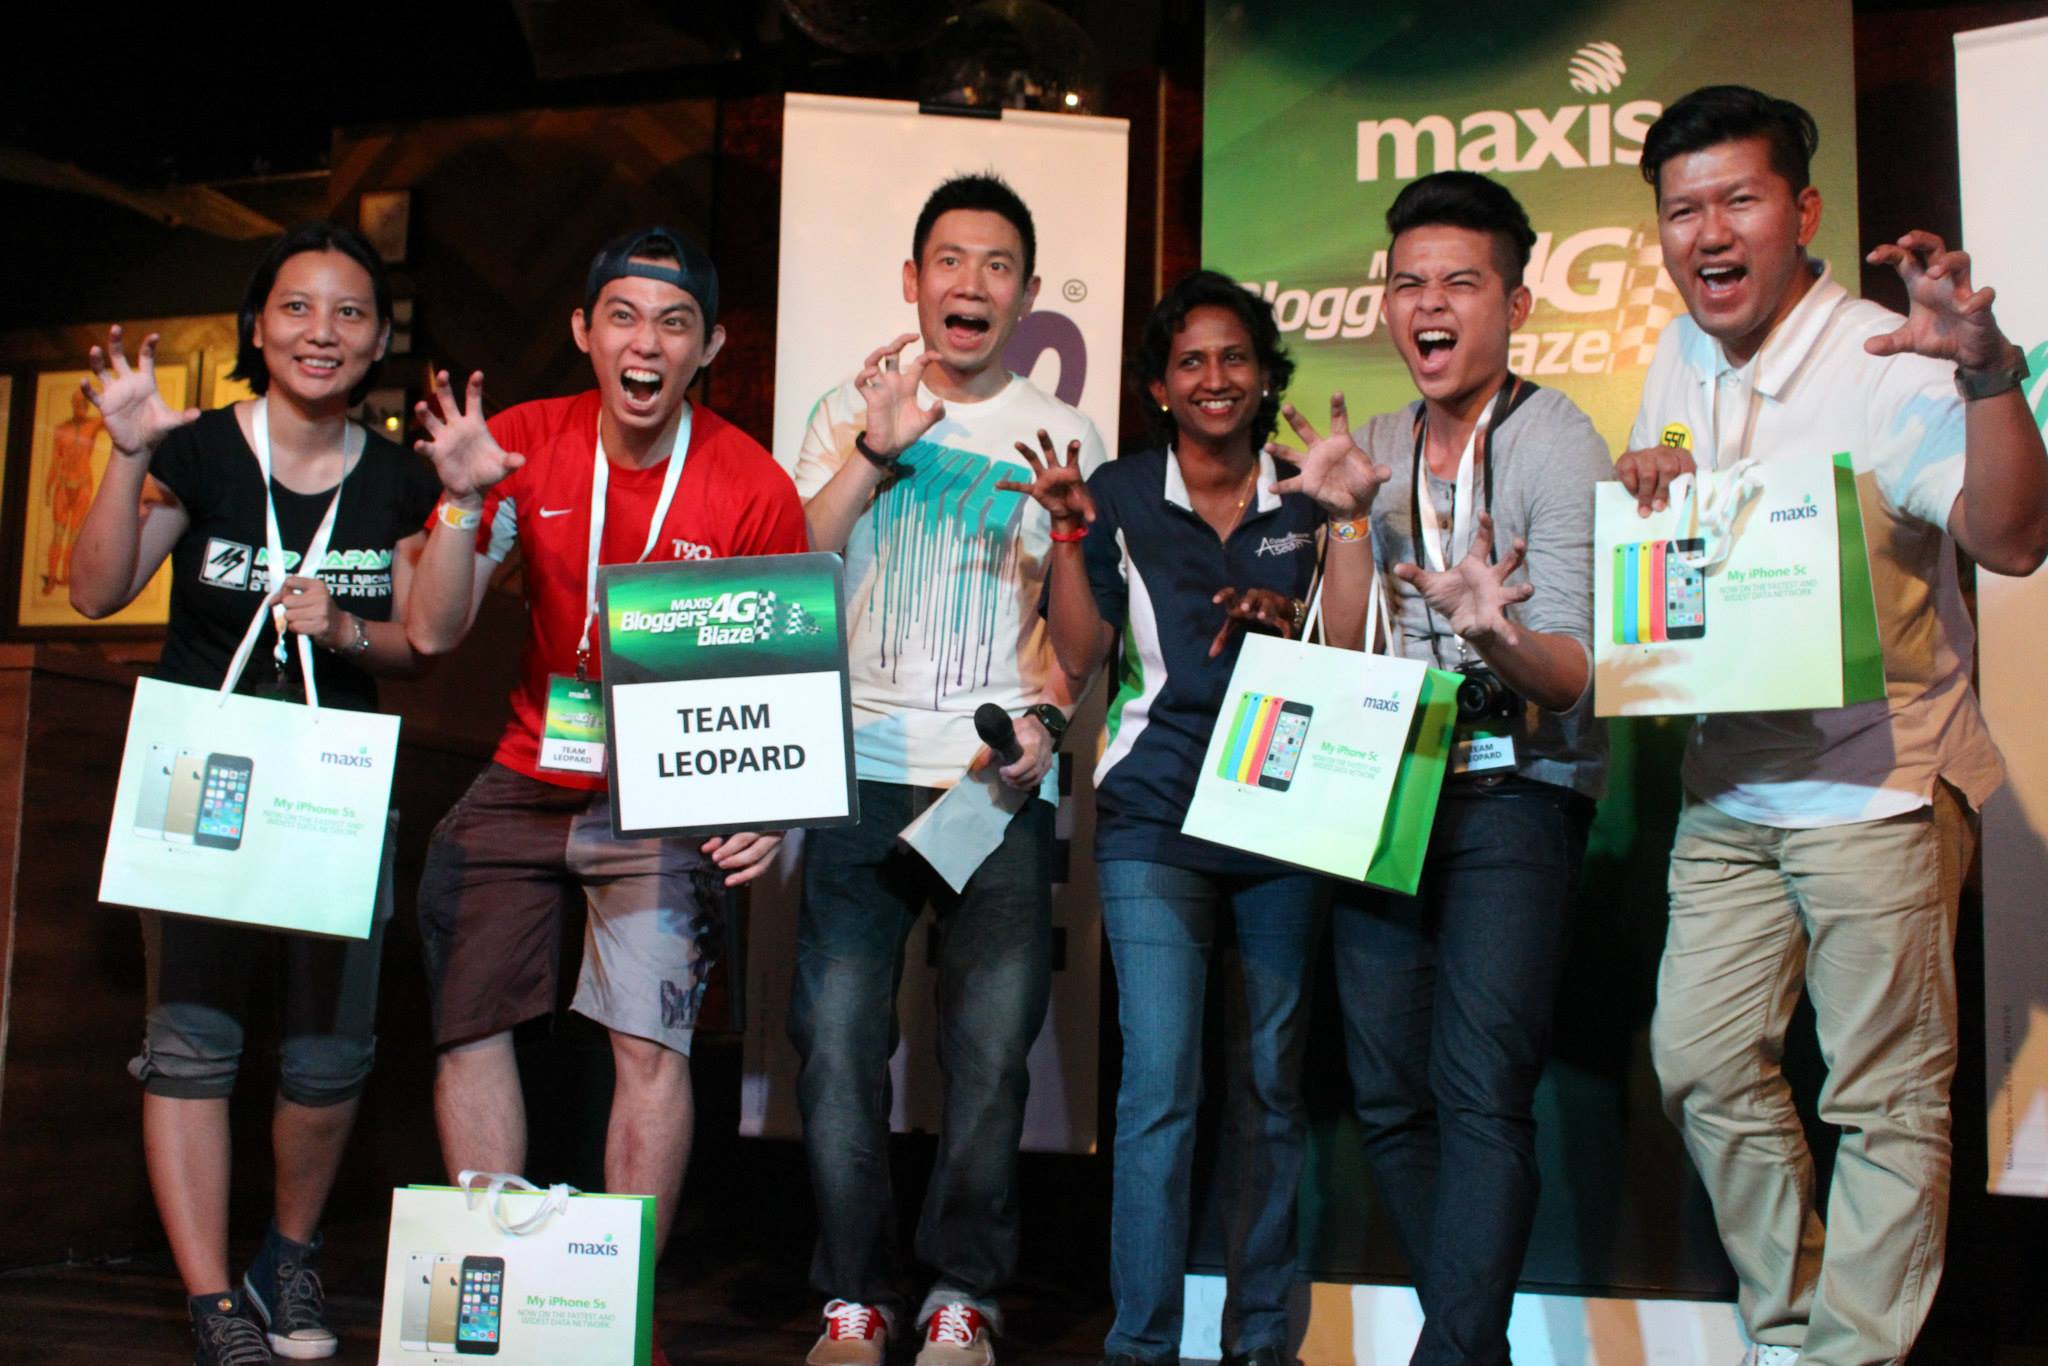 Maxis 4G Bloggers Blaze @ The Curve : The Runner-Up was Team Leopard who walks home with an iPad Mini and a Maxis LTE WiFi Modem each